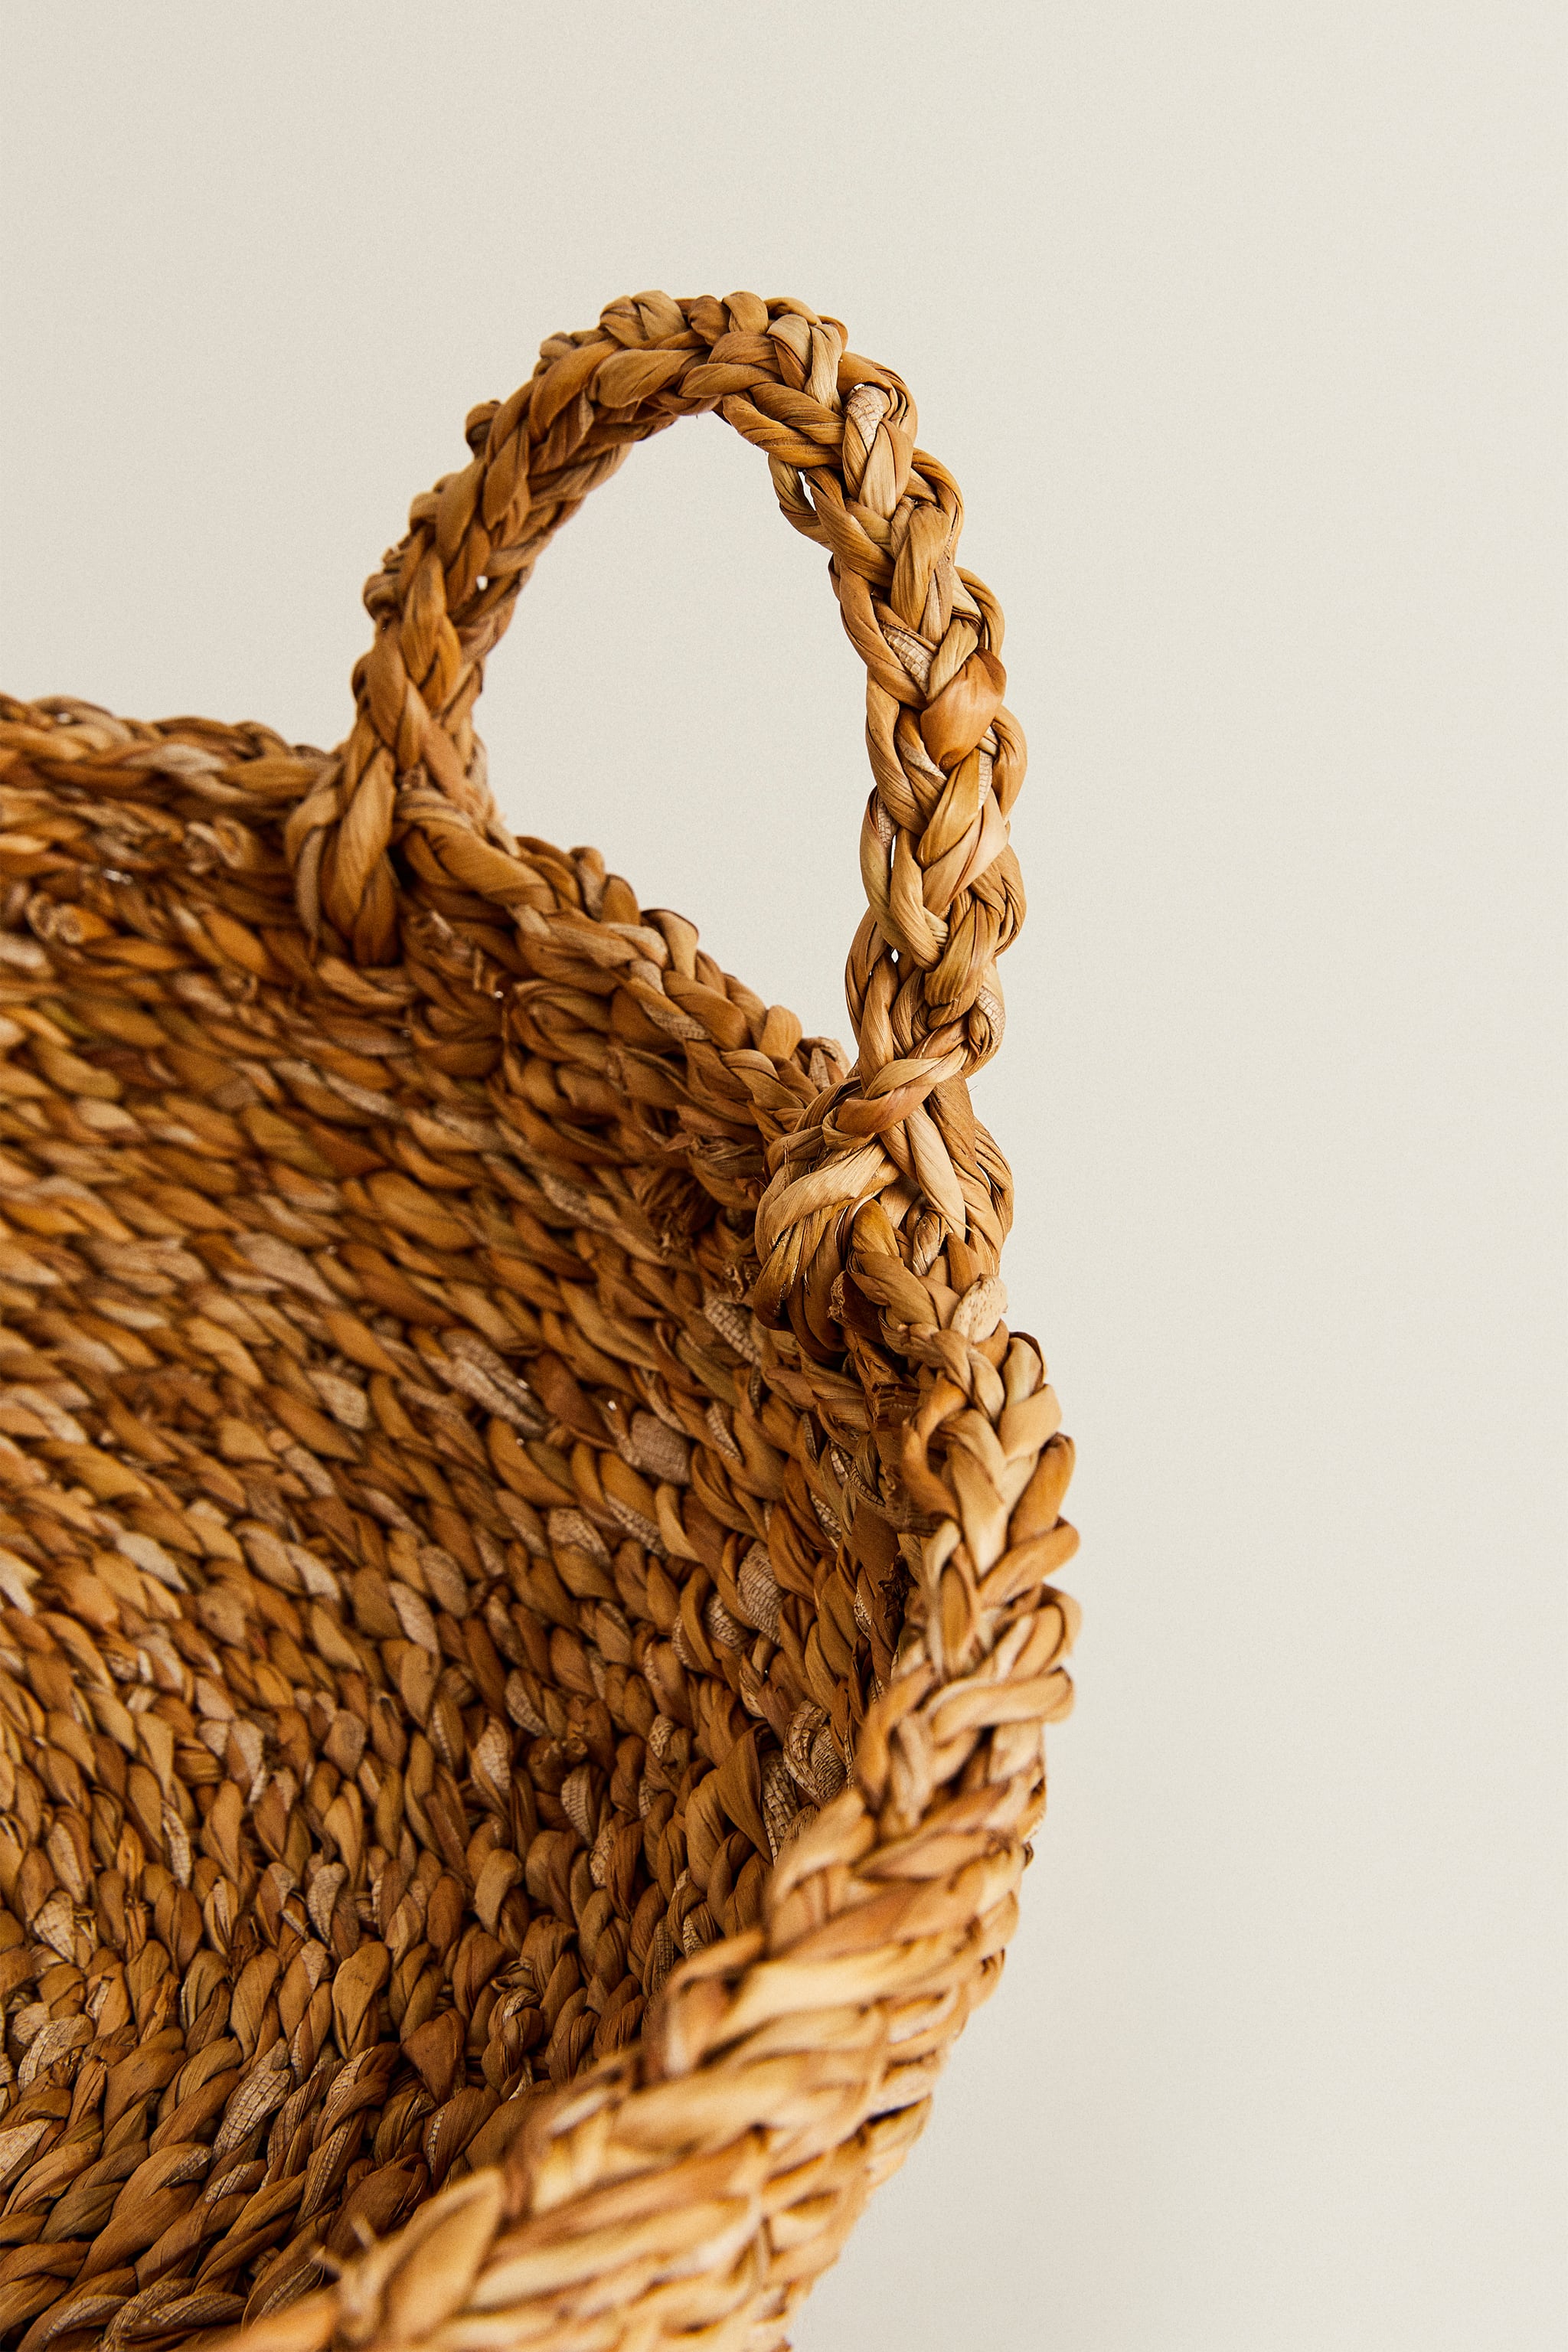 LARGE BASKET WITH HANDLES